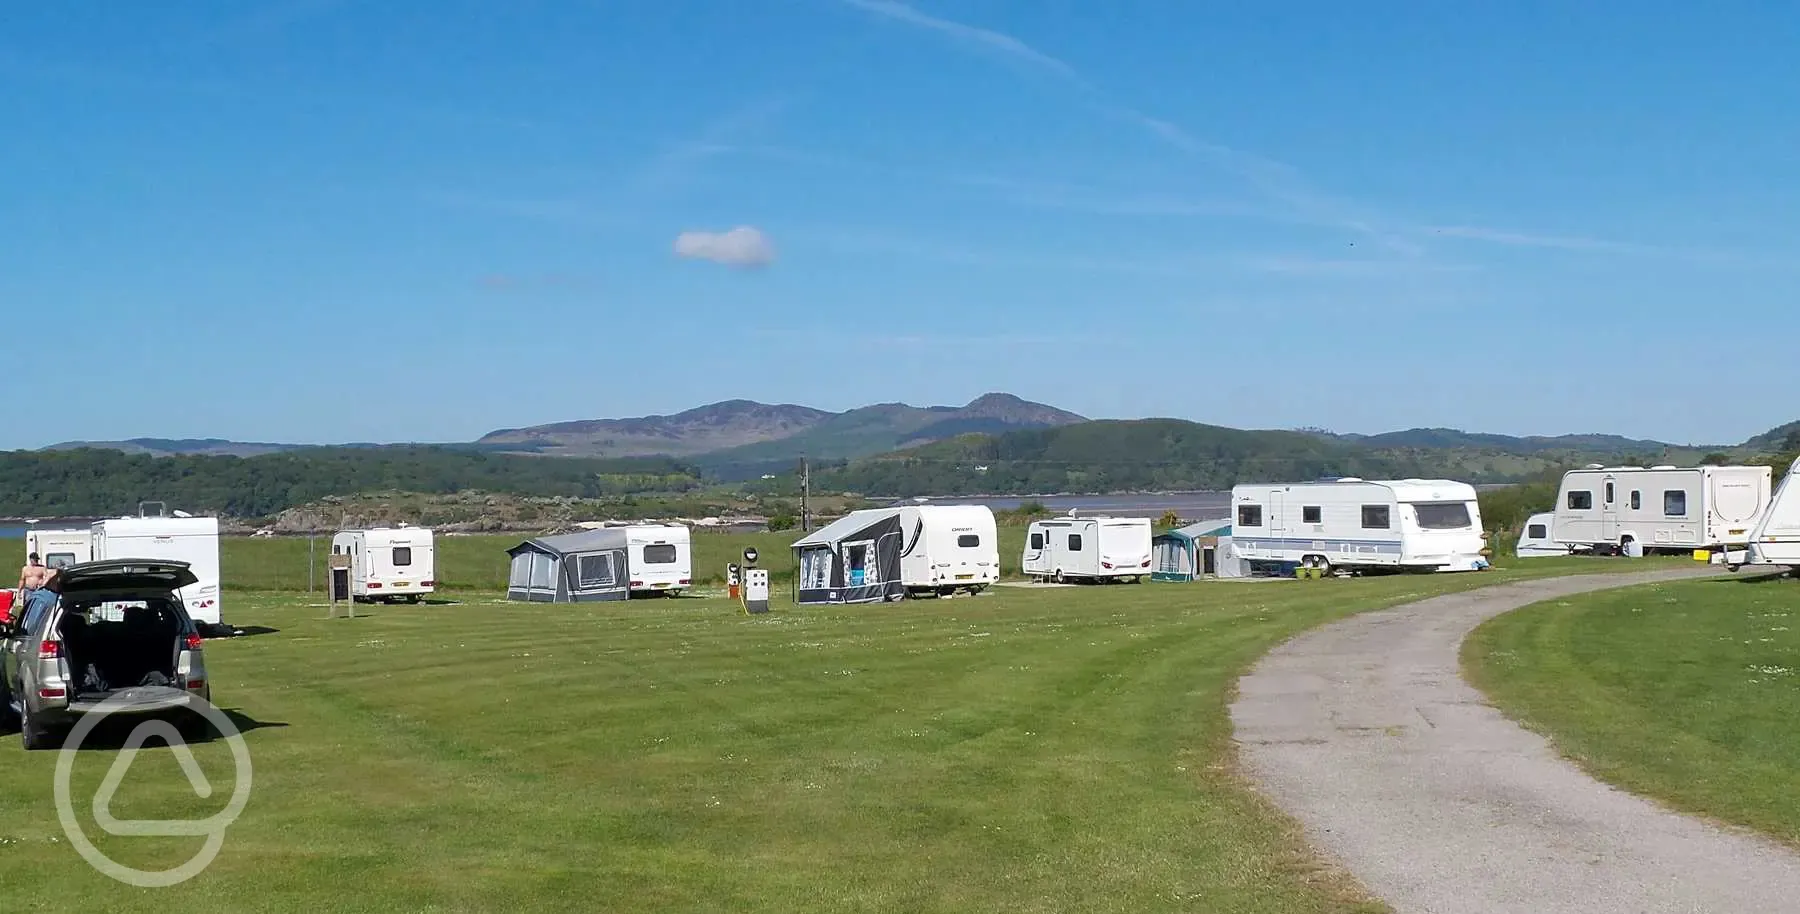 Touring pitches 